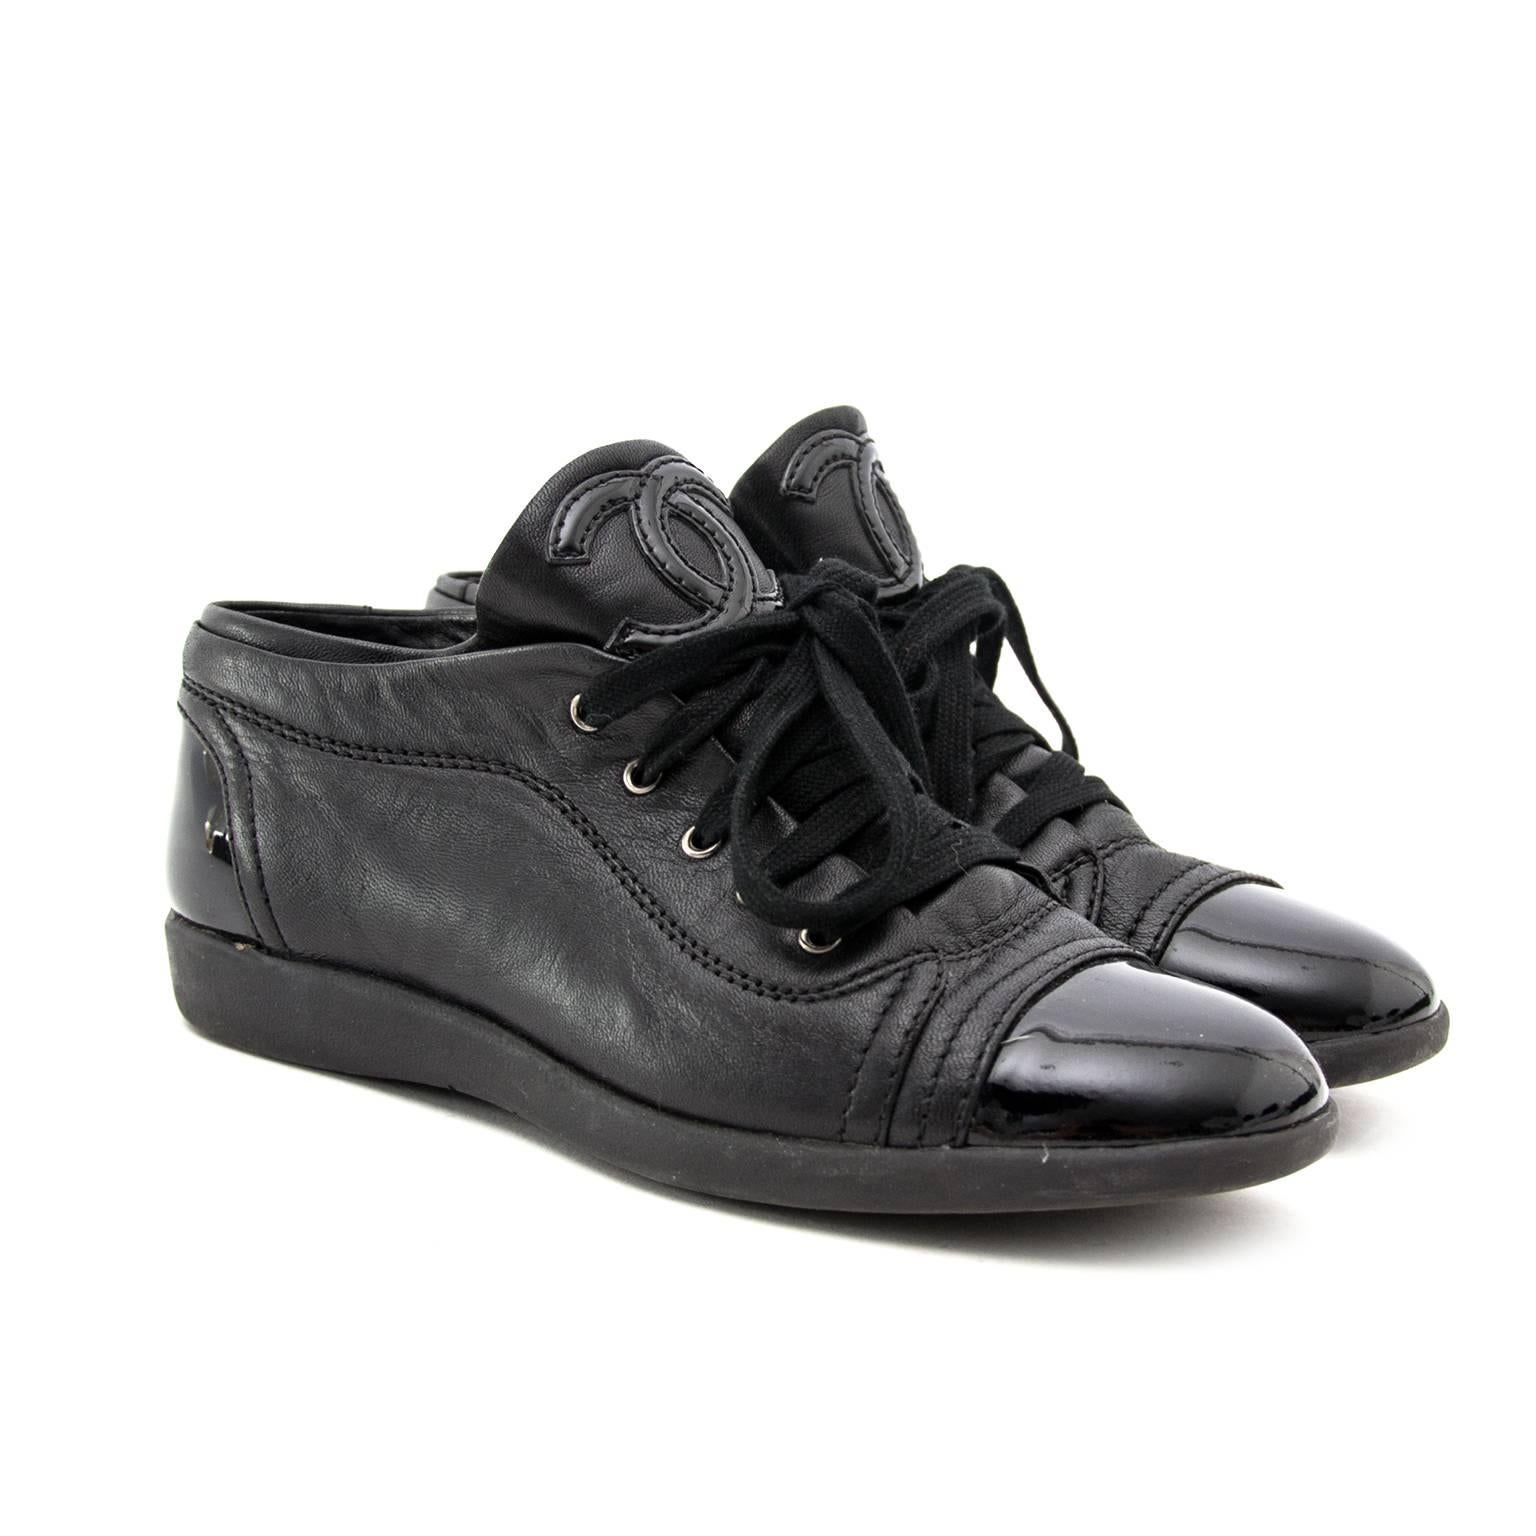 These Chanel Designed sneakers are comfortable and classy at the same time.
In black leather is combined with a black patent tip and heel.
On the shoe tongue, there's a subtle patent leather Chanel sign.
A perfect every day shoe.